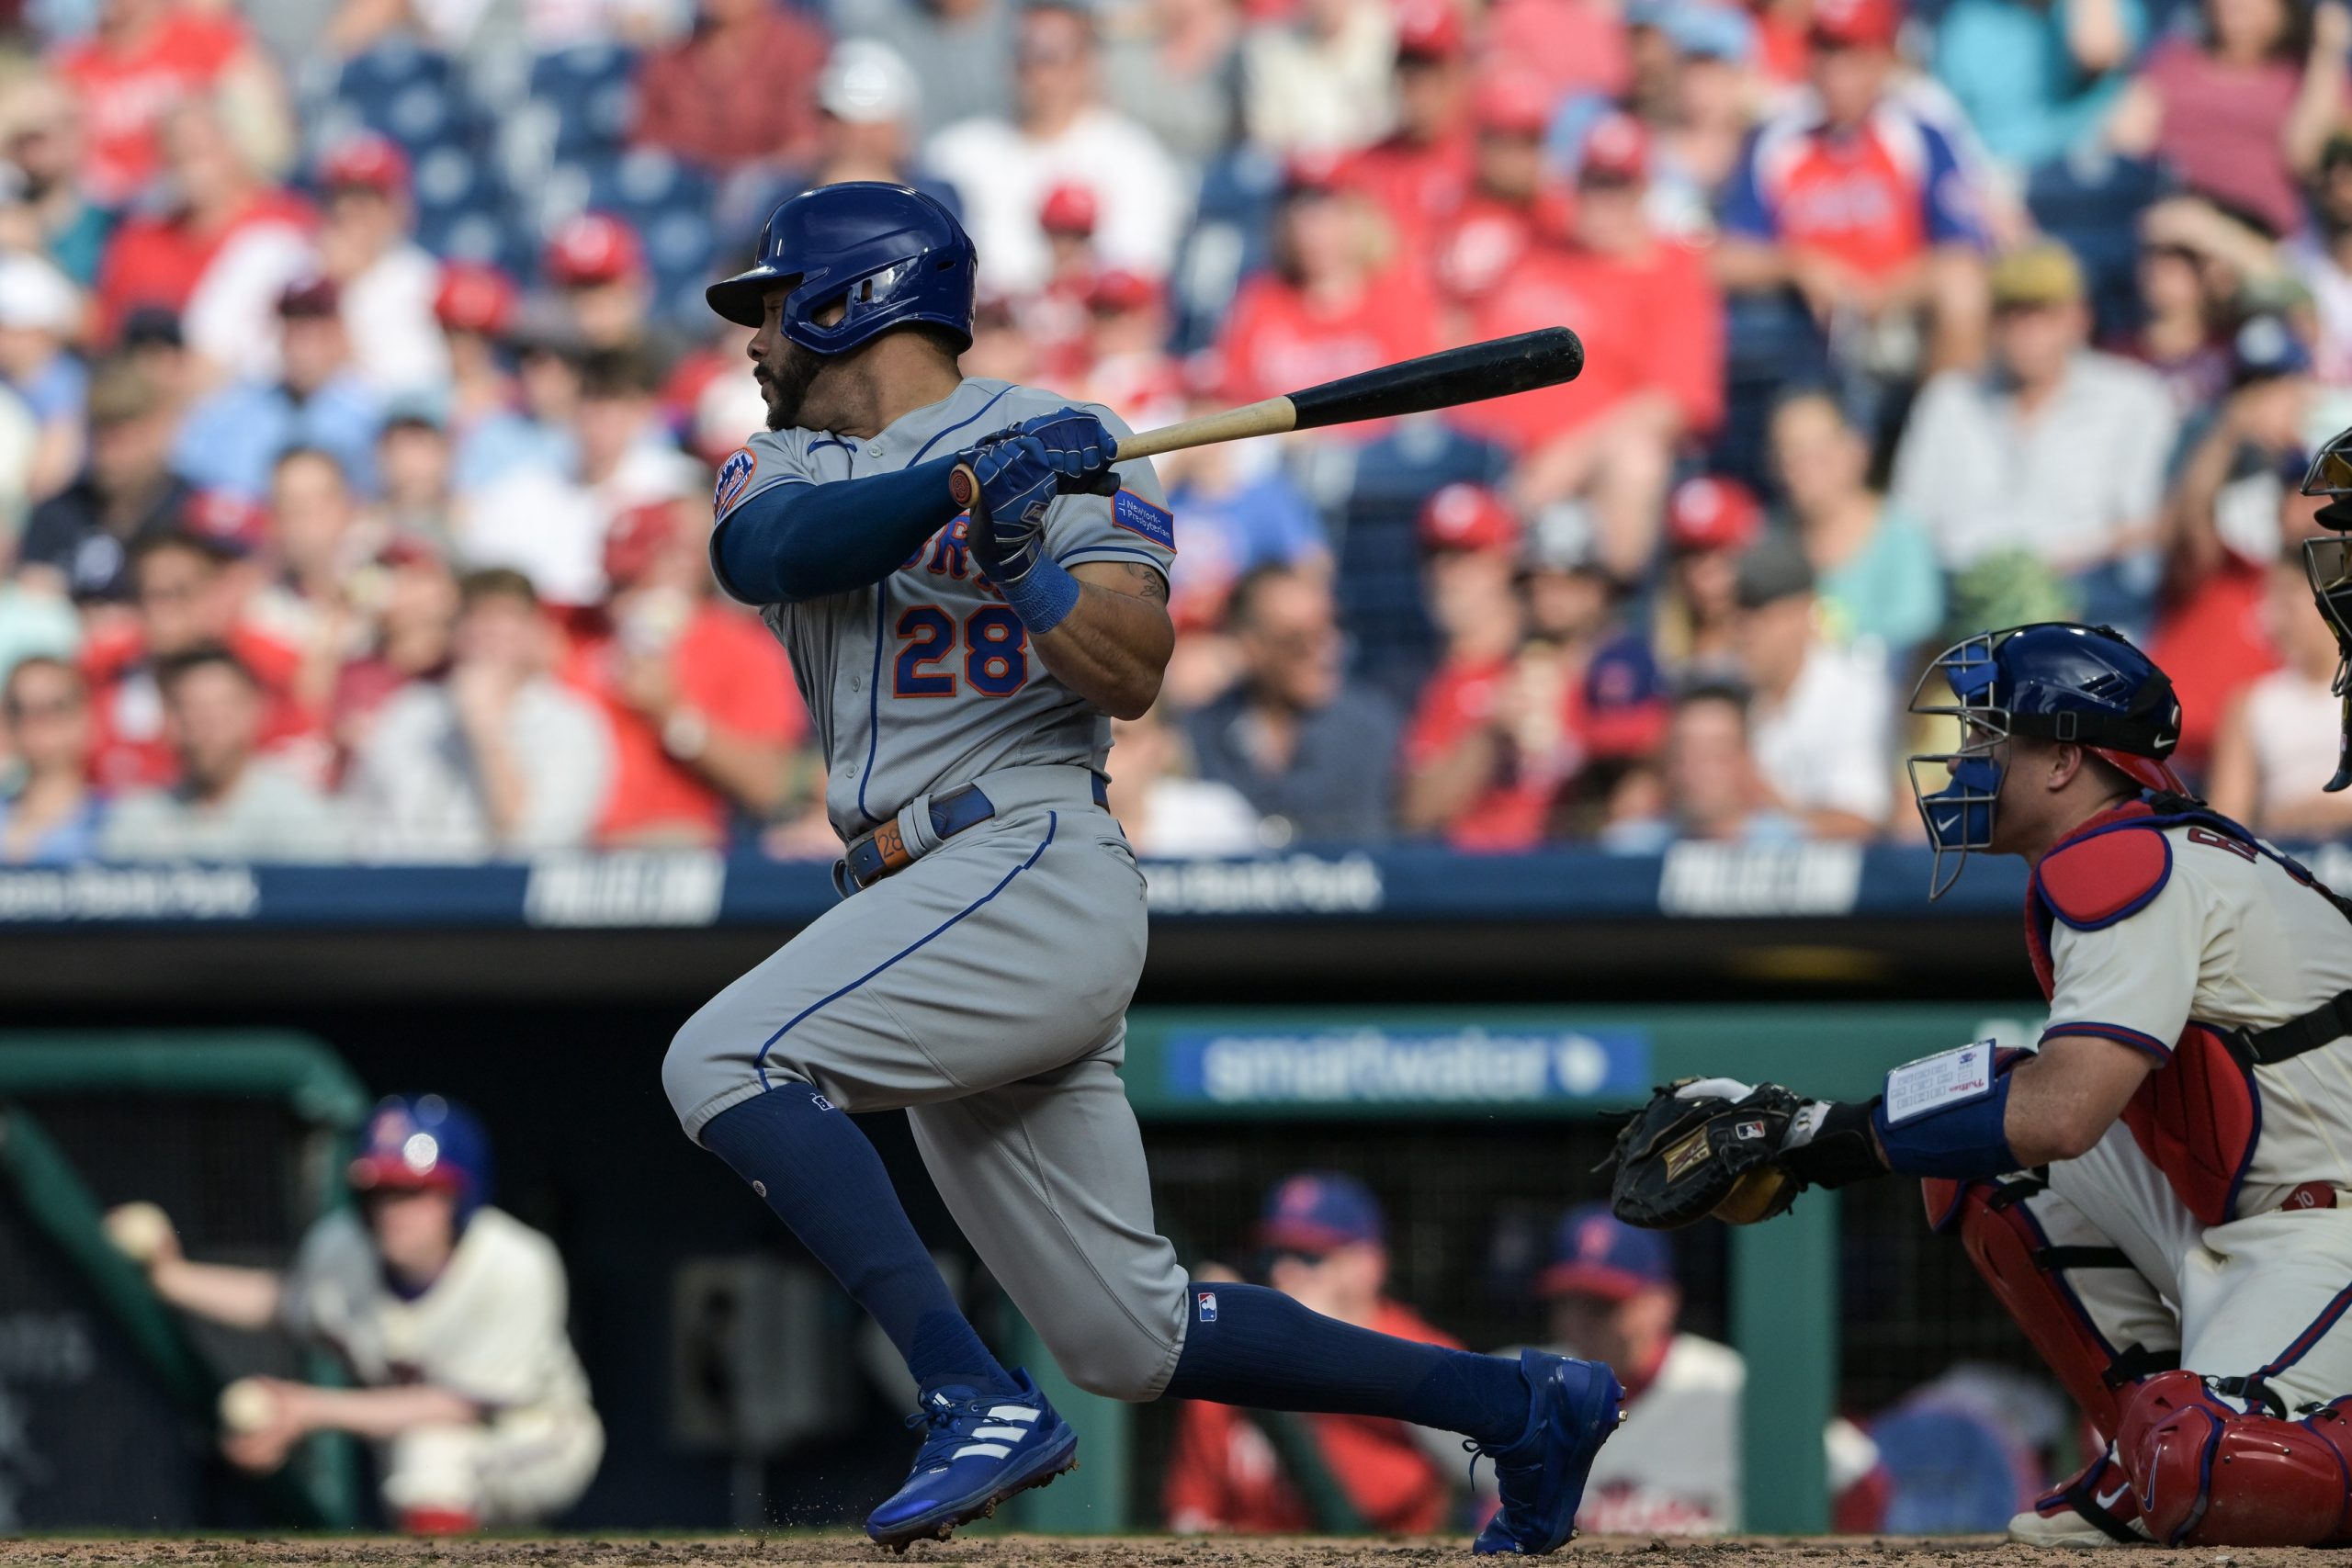 New York Mets sluggers who led the league in home runs